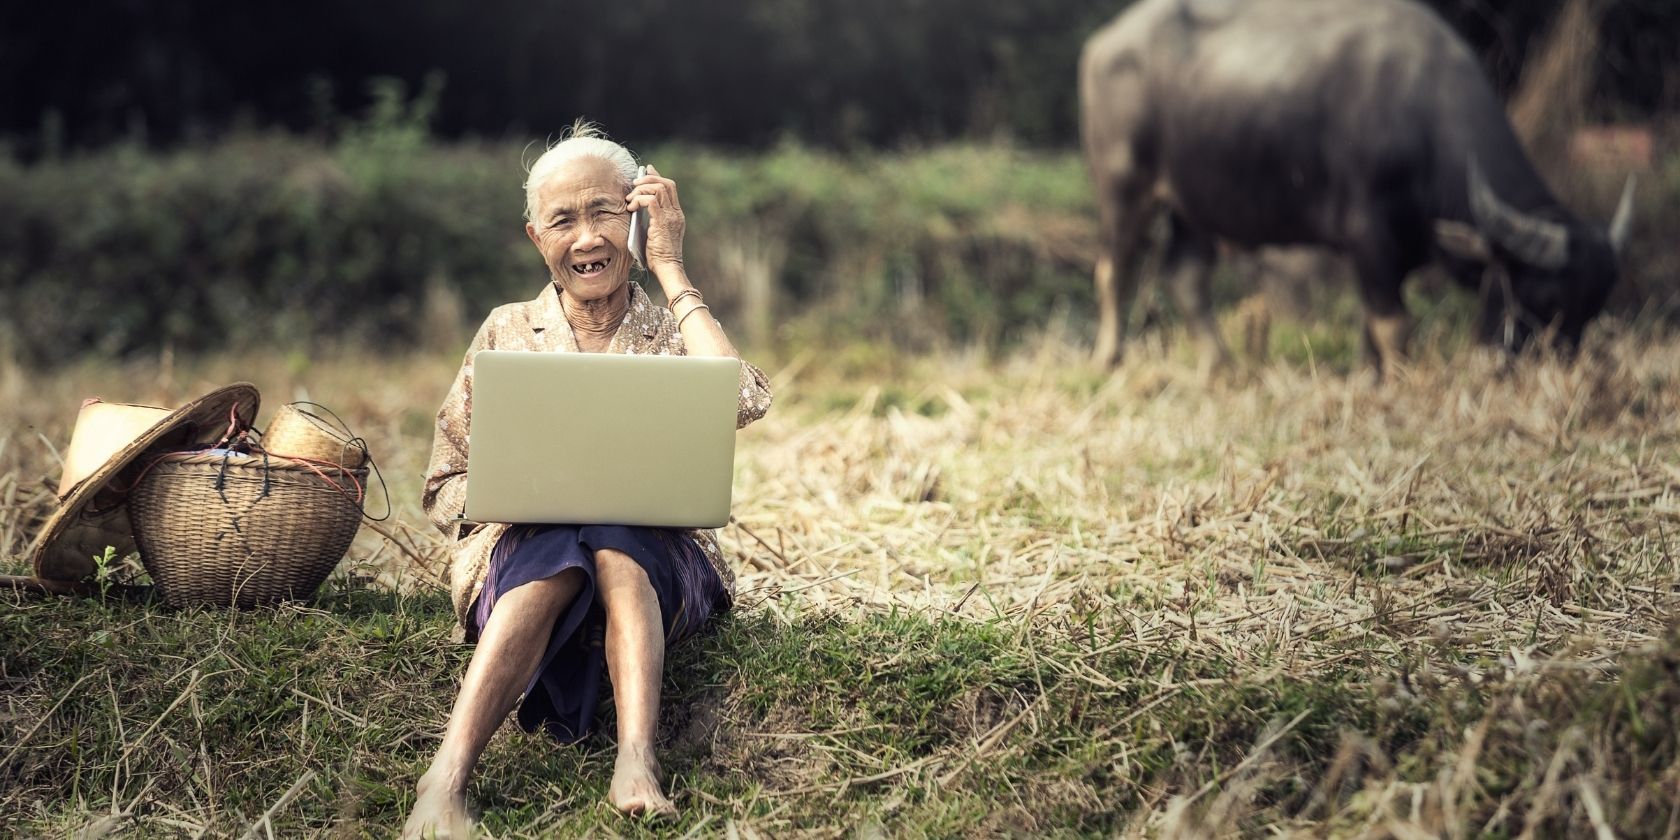 a person using the internet in a rural area